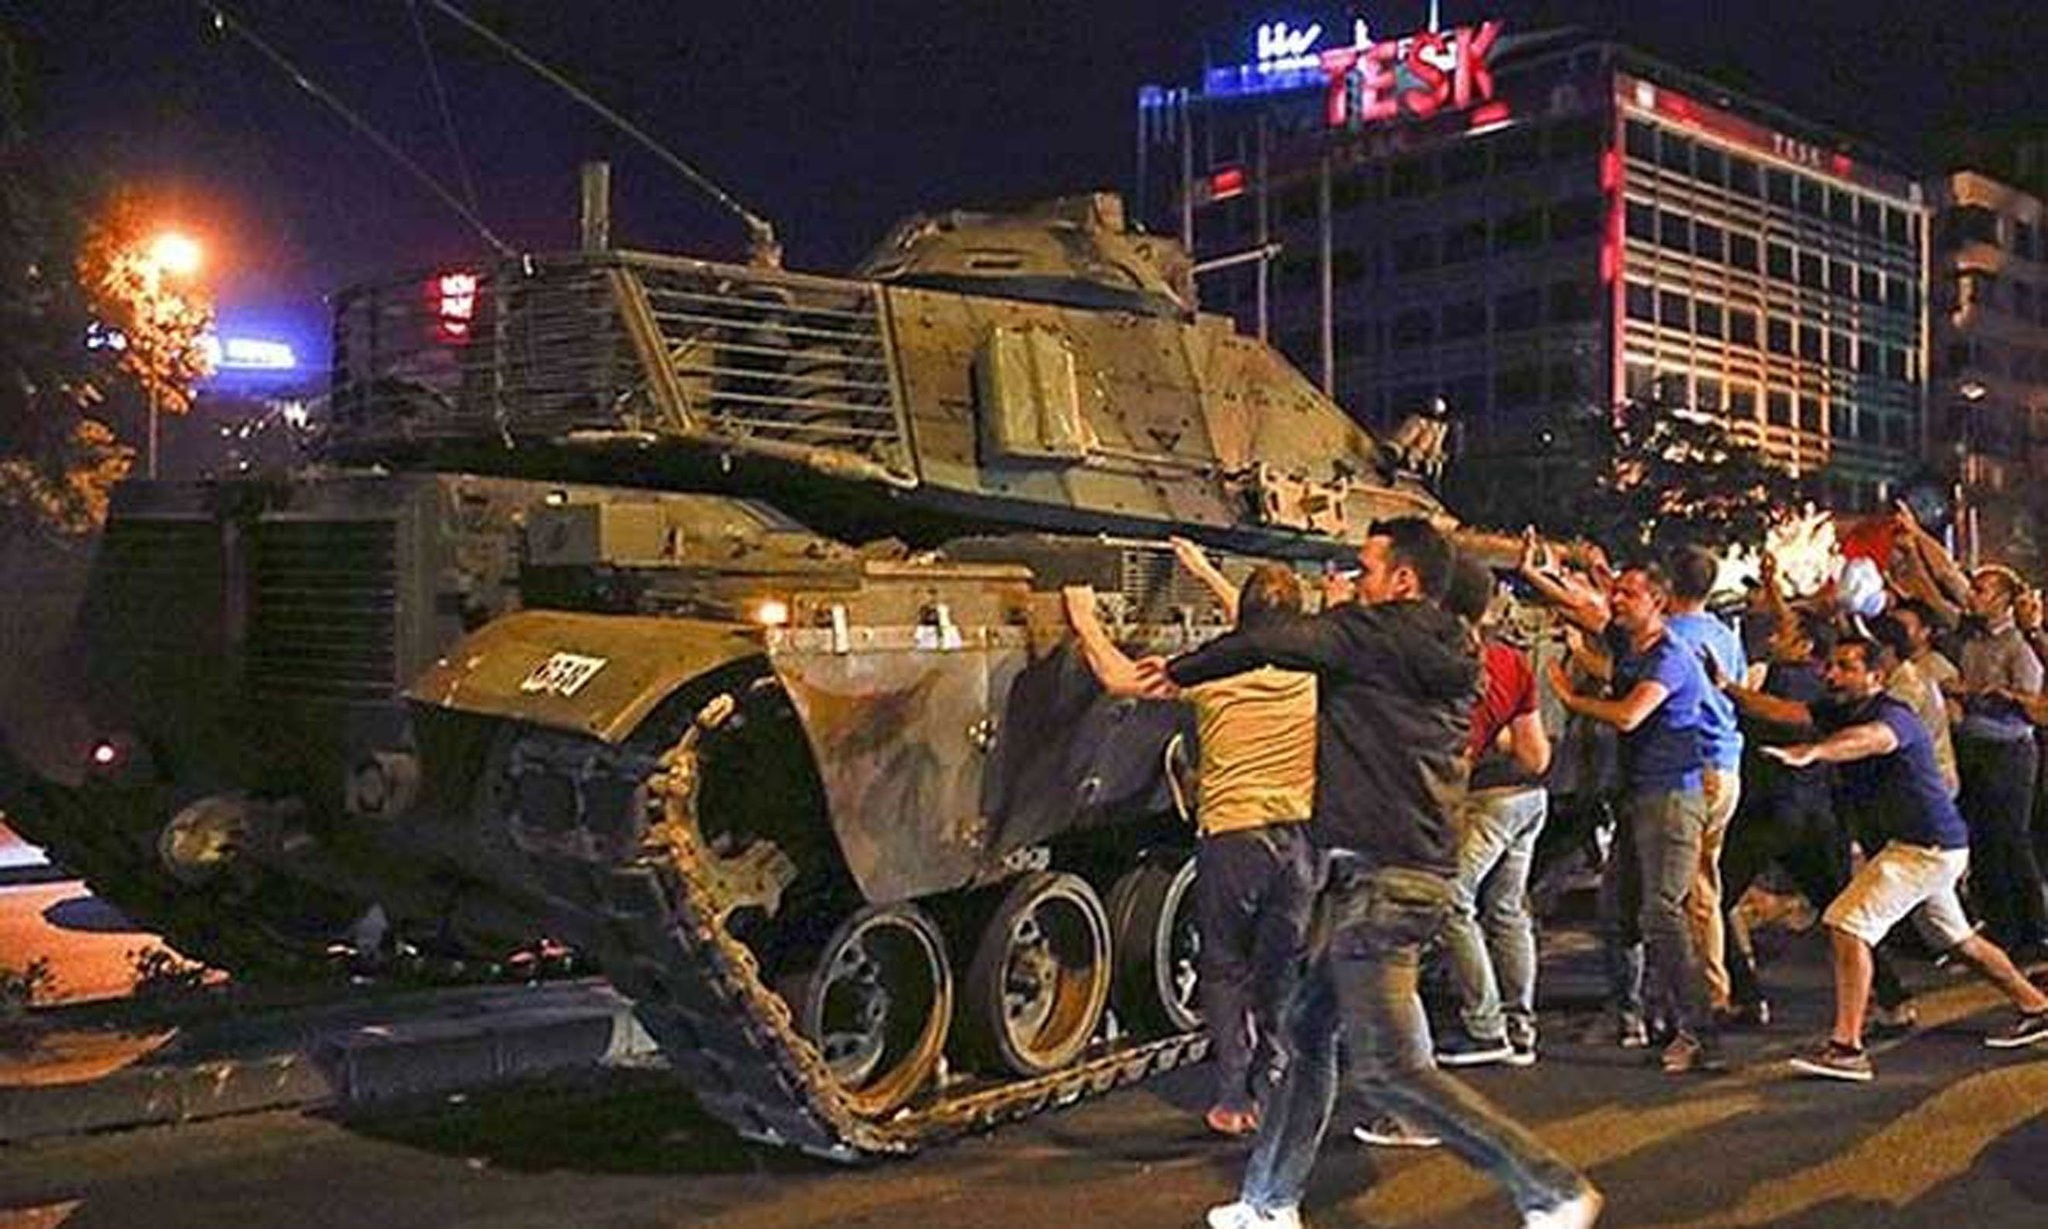 People try to stop a tank commanded by putschists in Ankara on July 15, 2016.